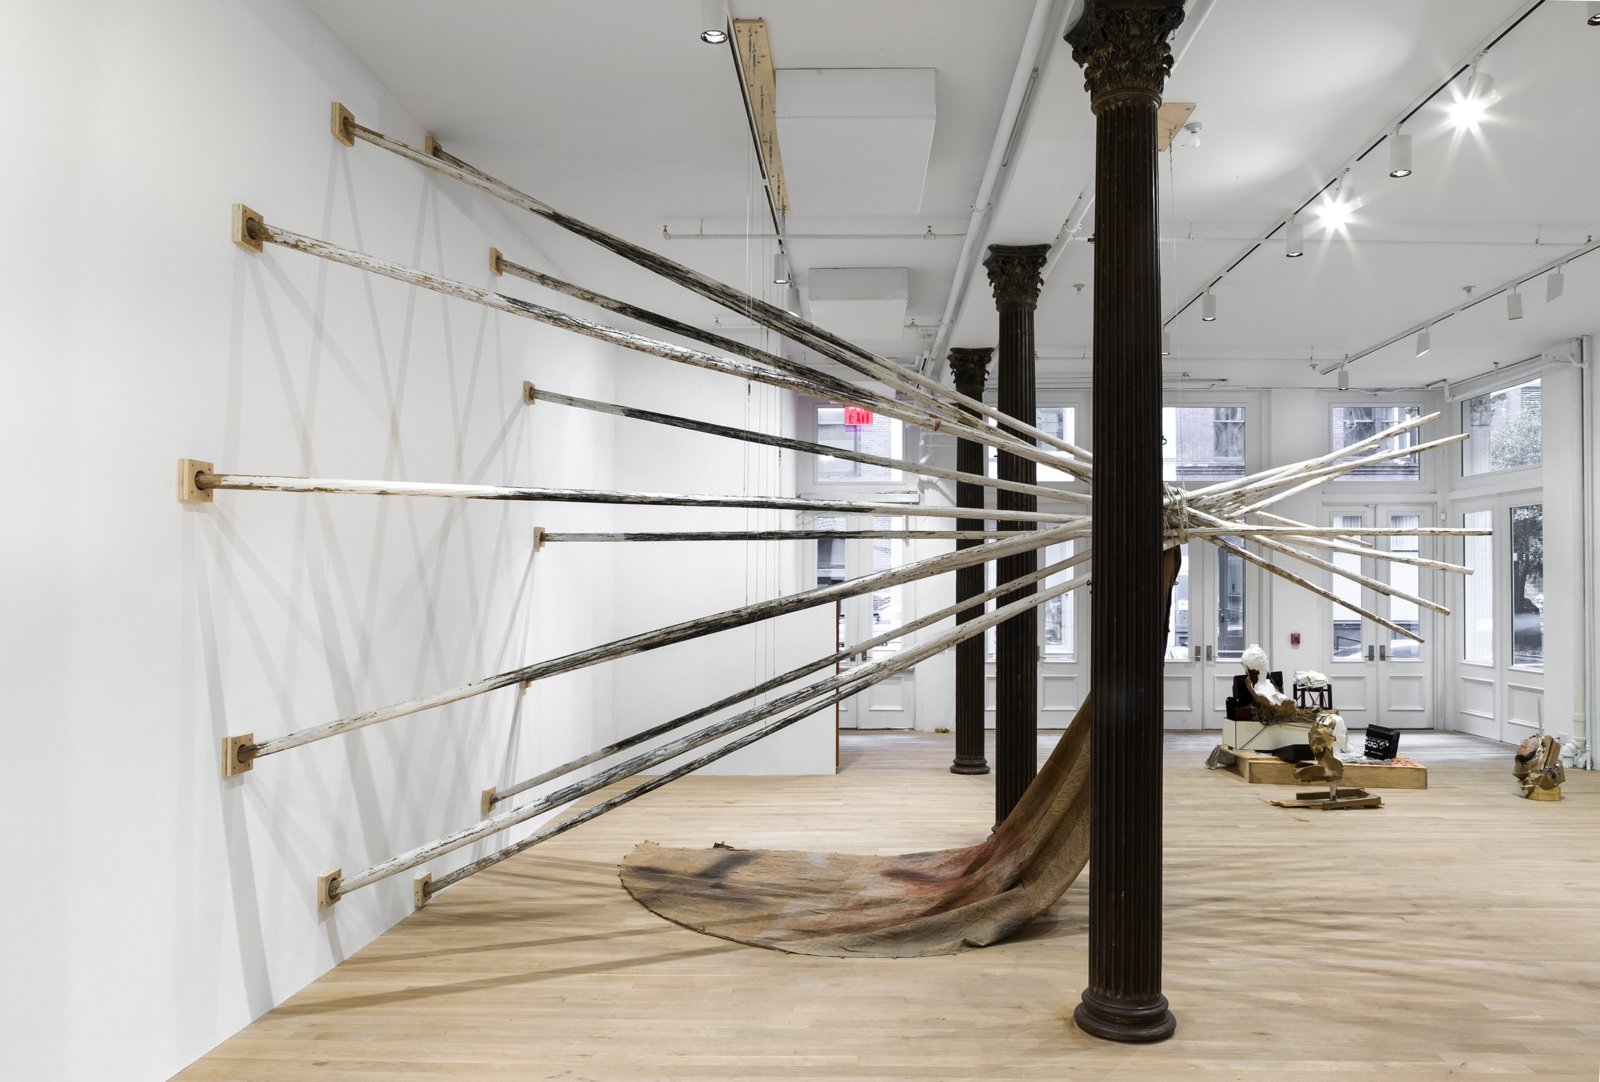 Duane Linklater, dislodgevanishskinground, 2019, 12 tipi poles, steel cable, white paint, charcoal, rope, digital print on linen, black tea, blueberry extract, sumac, charcoal, 220 x 174 x 174 in. (559 x 442 x 442 cm). Installation view, Artists Space, New York, USA, 2019